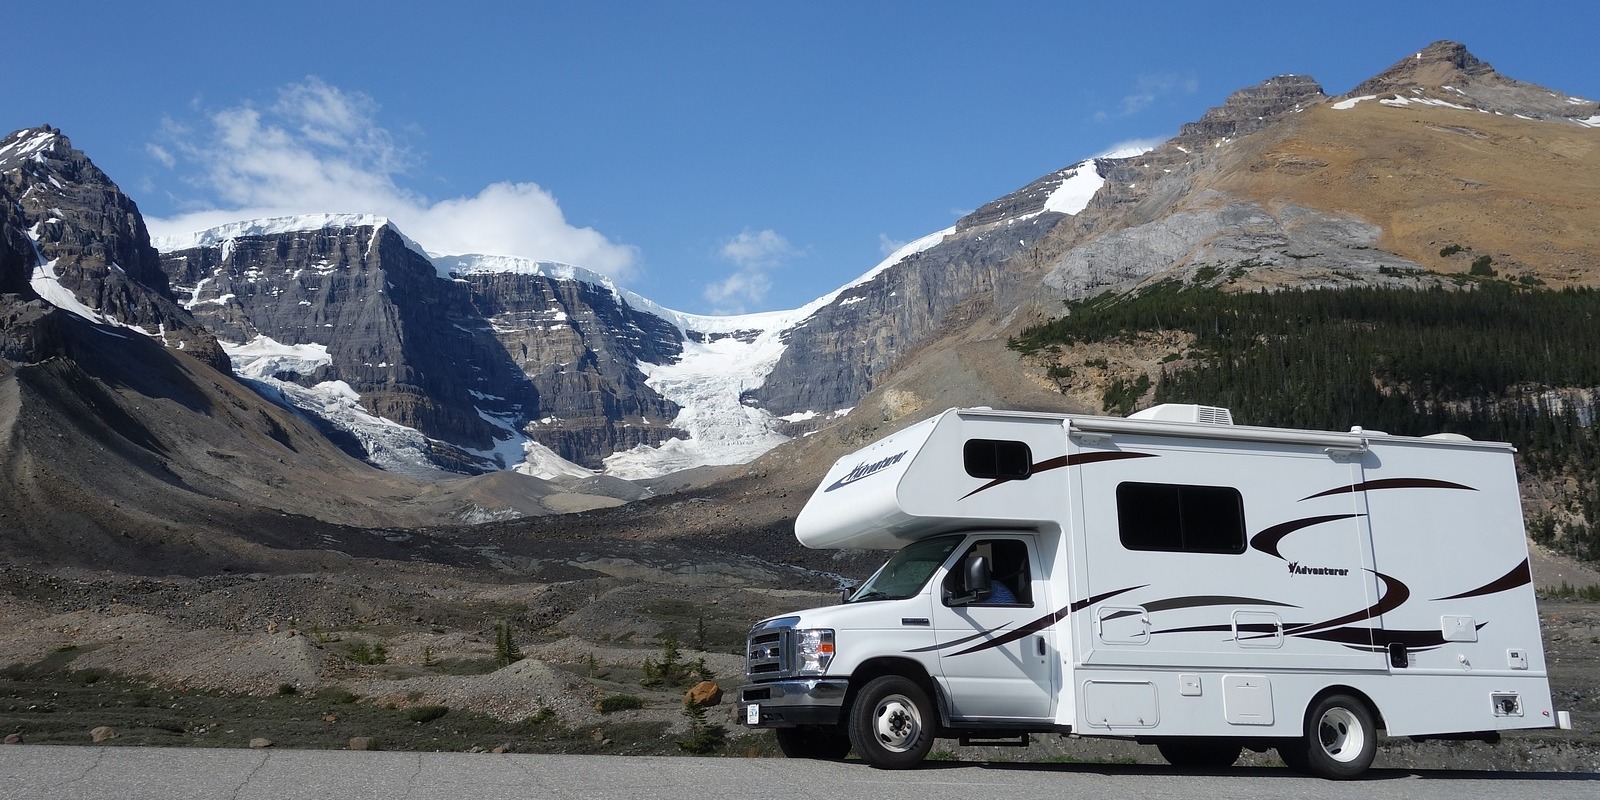 RV Travel Advantages and RV Tips